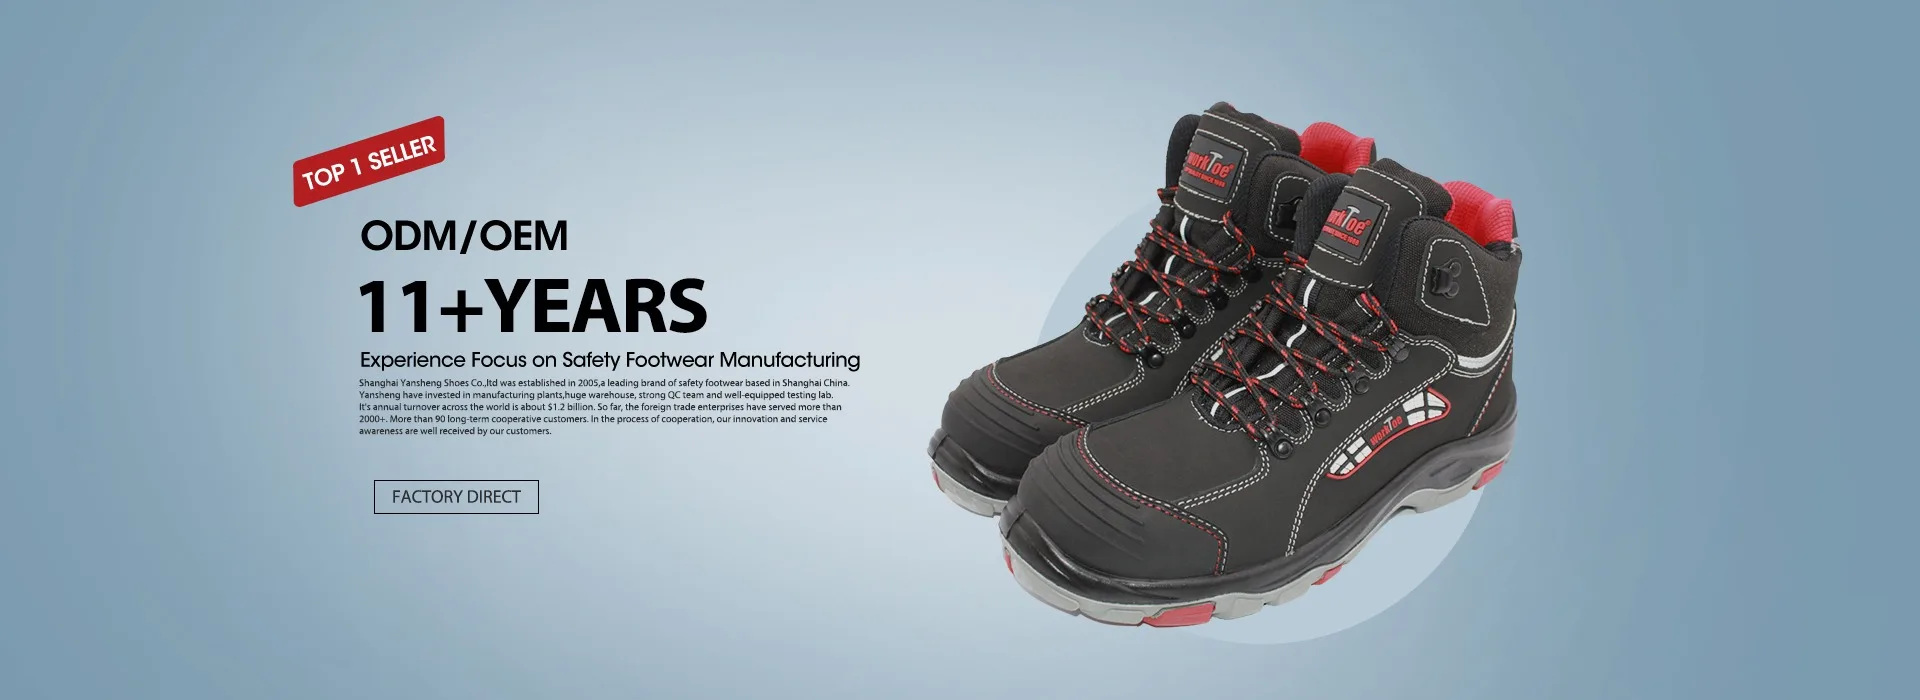 worktoes safety shoes price